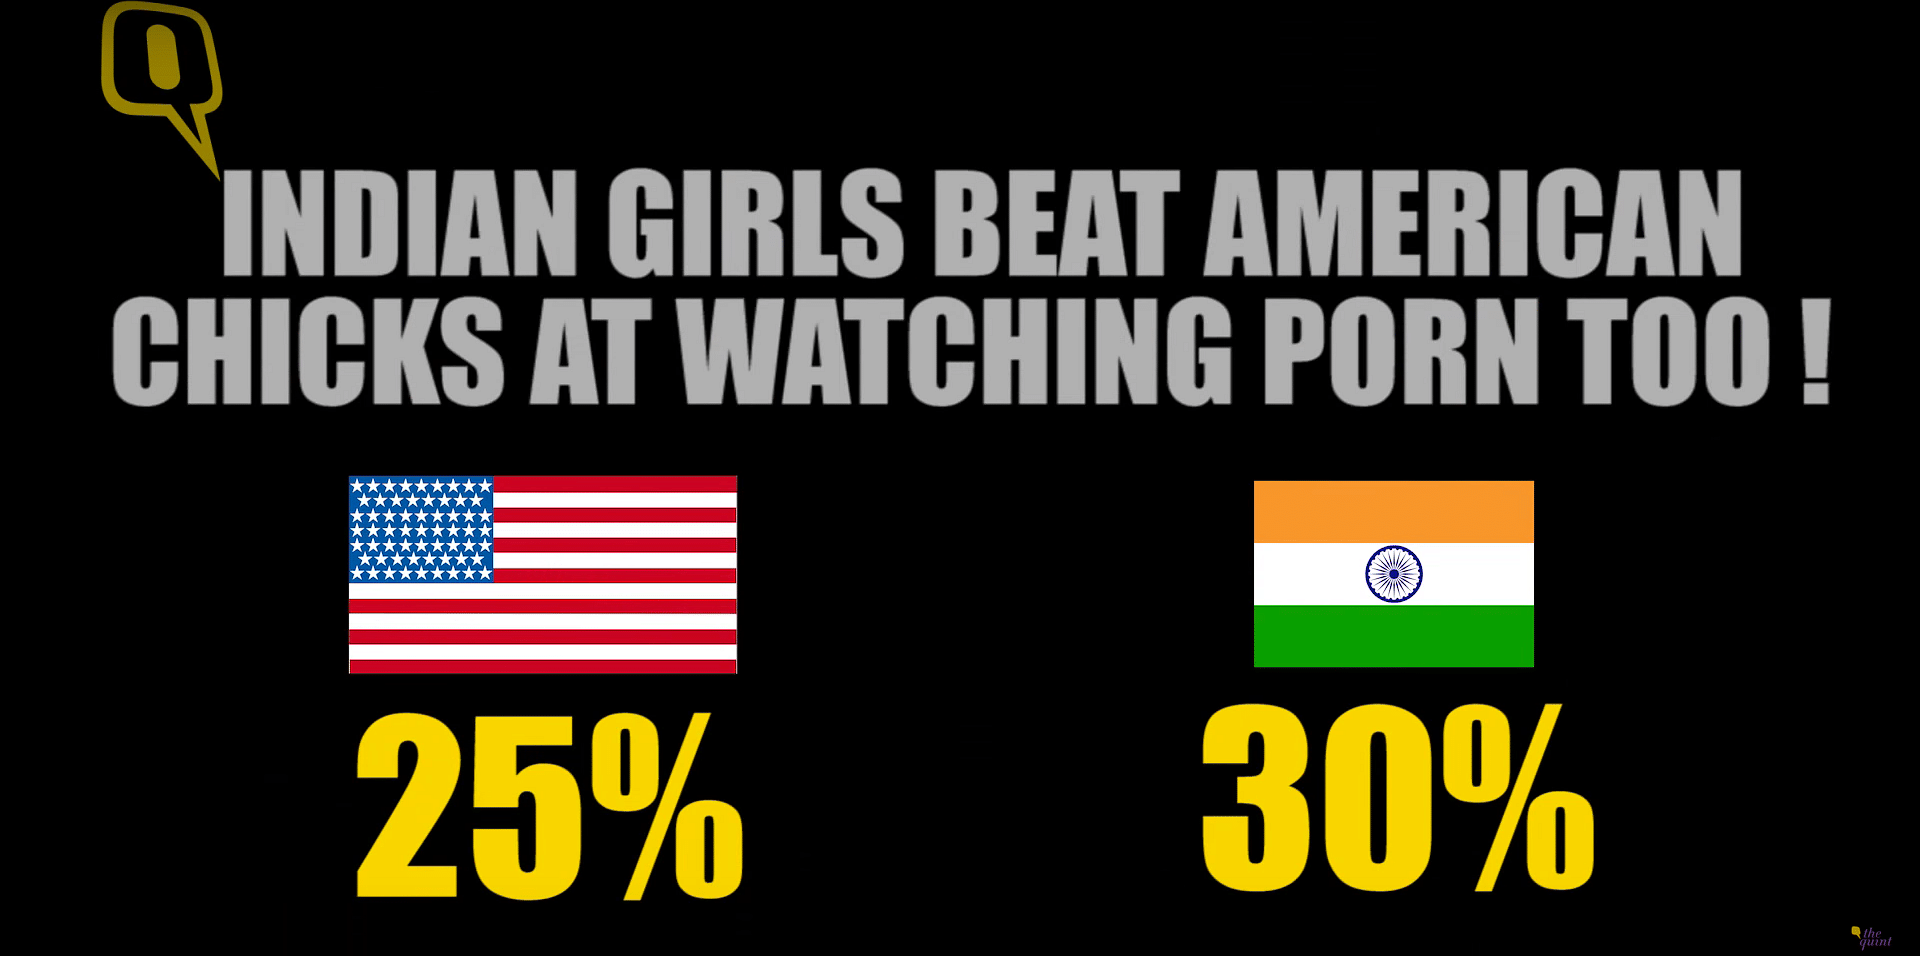 Indian Women Watching Porn - Facts About Indian Women and Pornography That'll Make You Grin